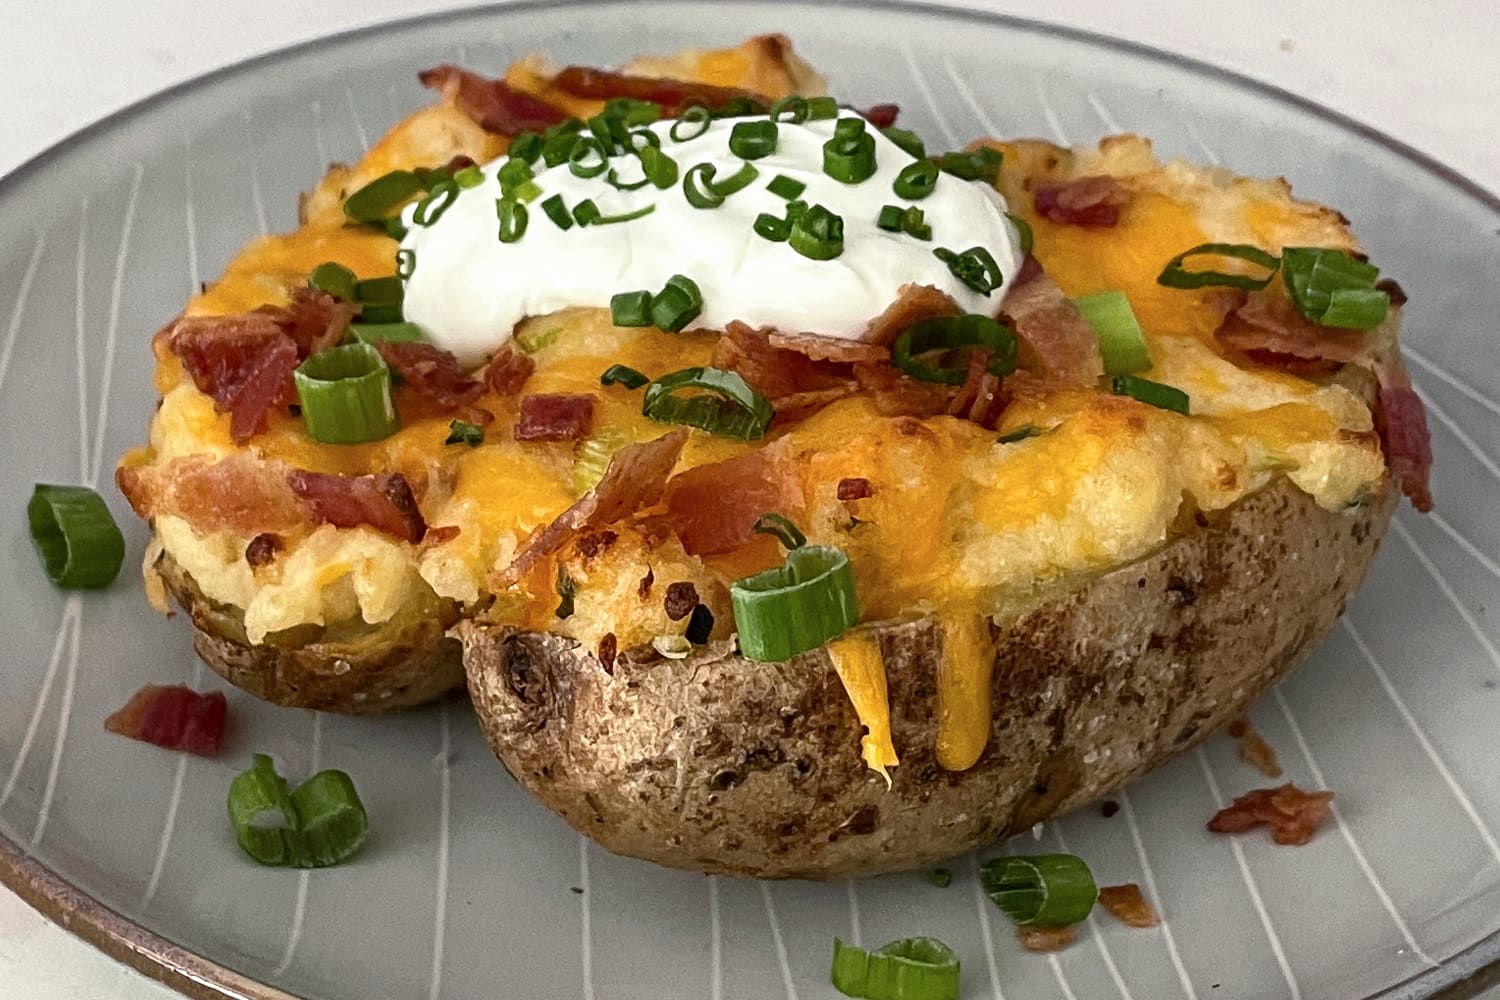 Loaded Baked Potato Recipe (With Lots of Cheese &amp; Bacon) | The Kitchn